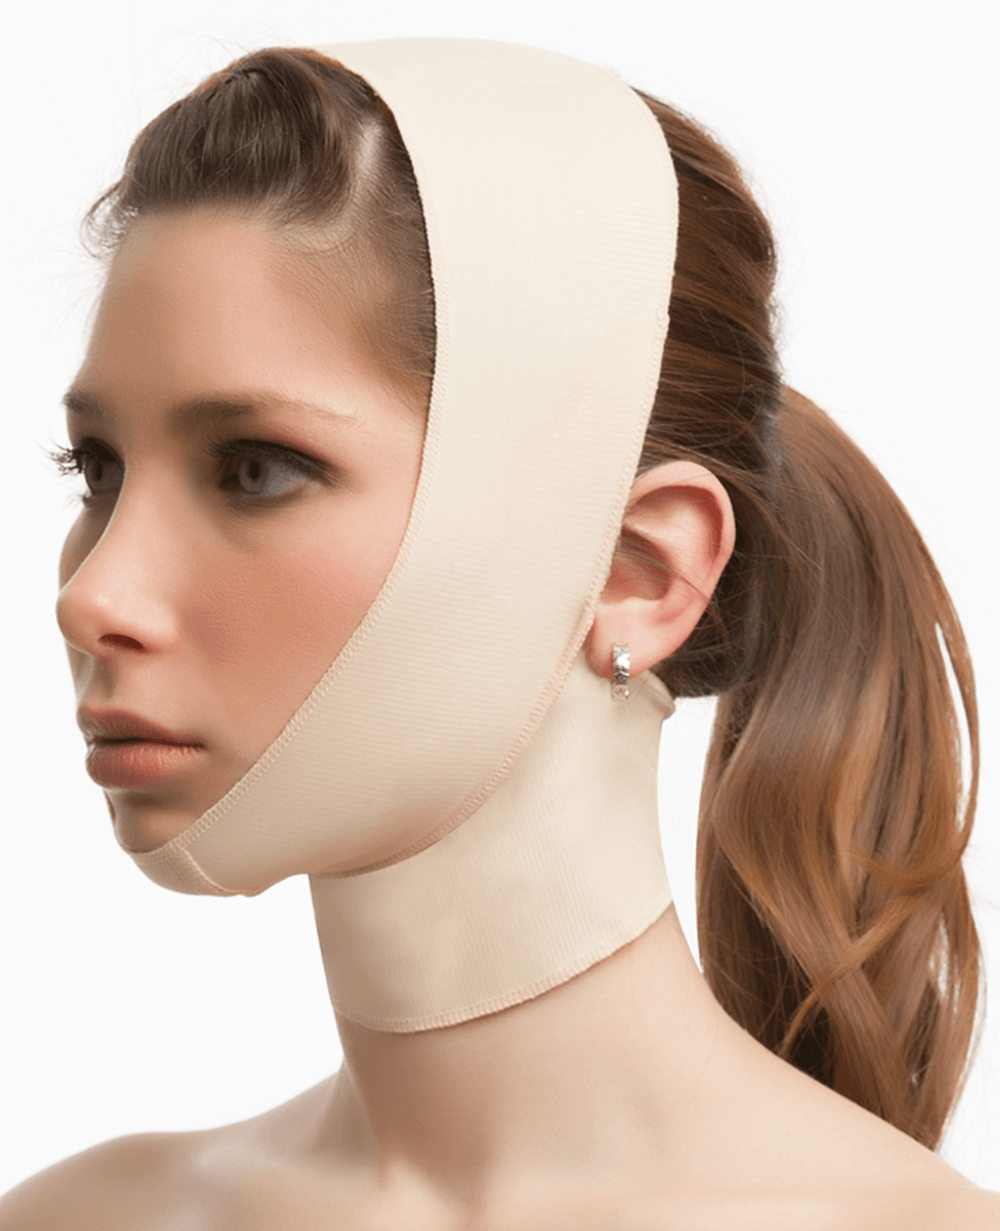 Recovery Garments For After Facial Surgery